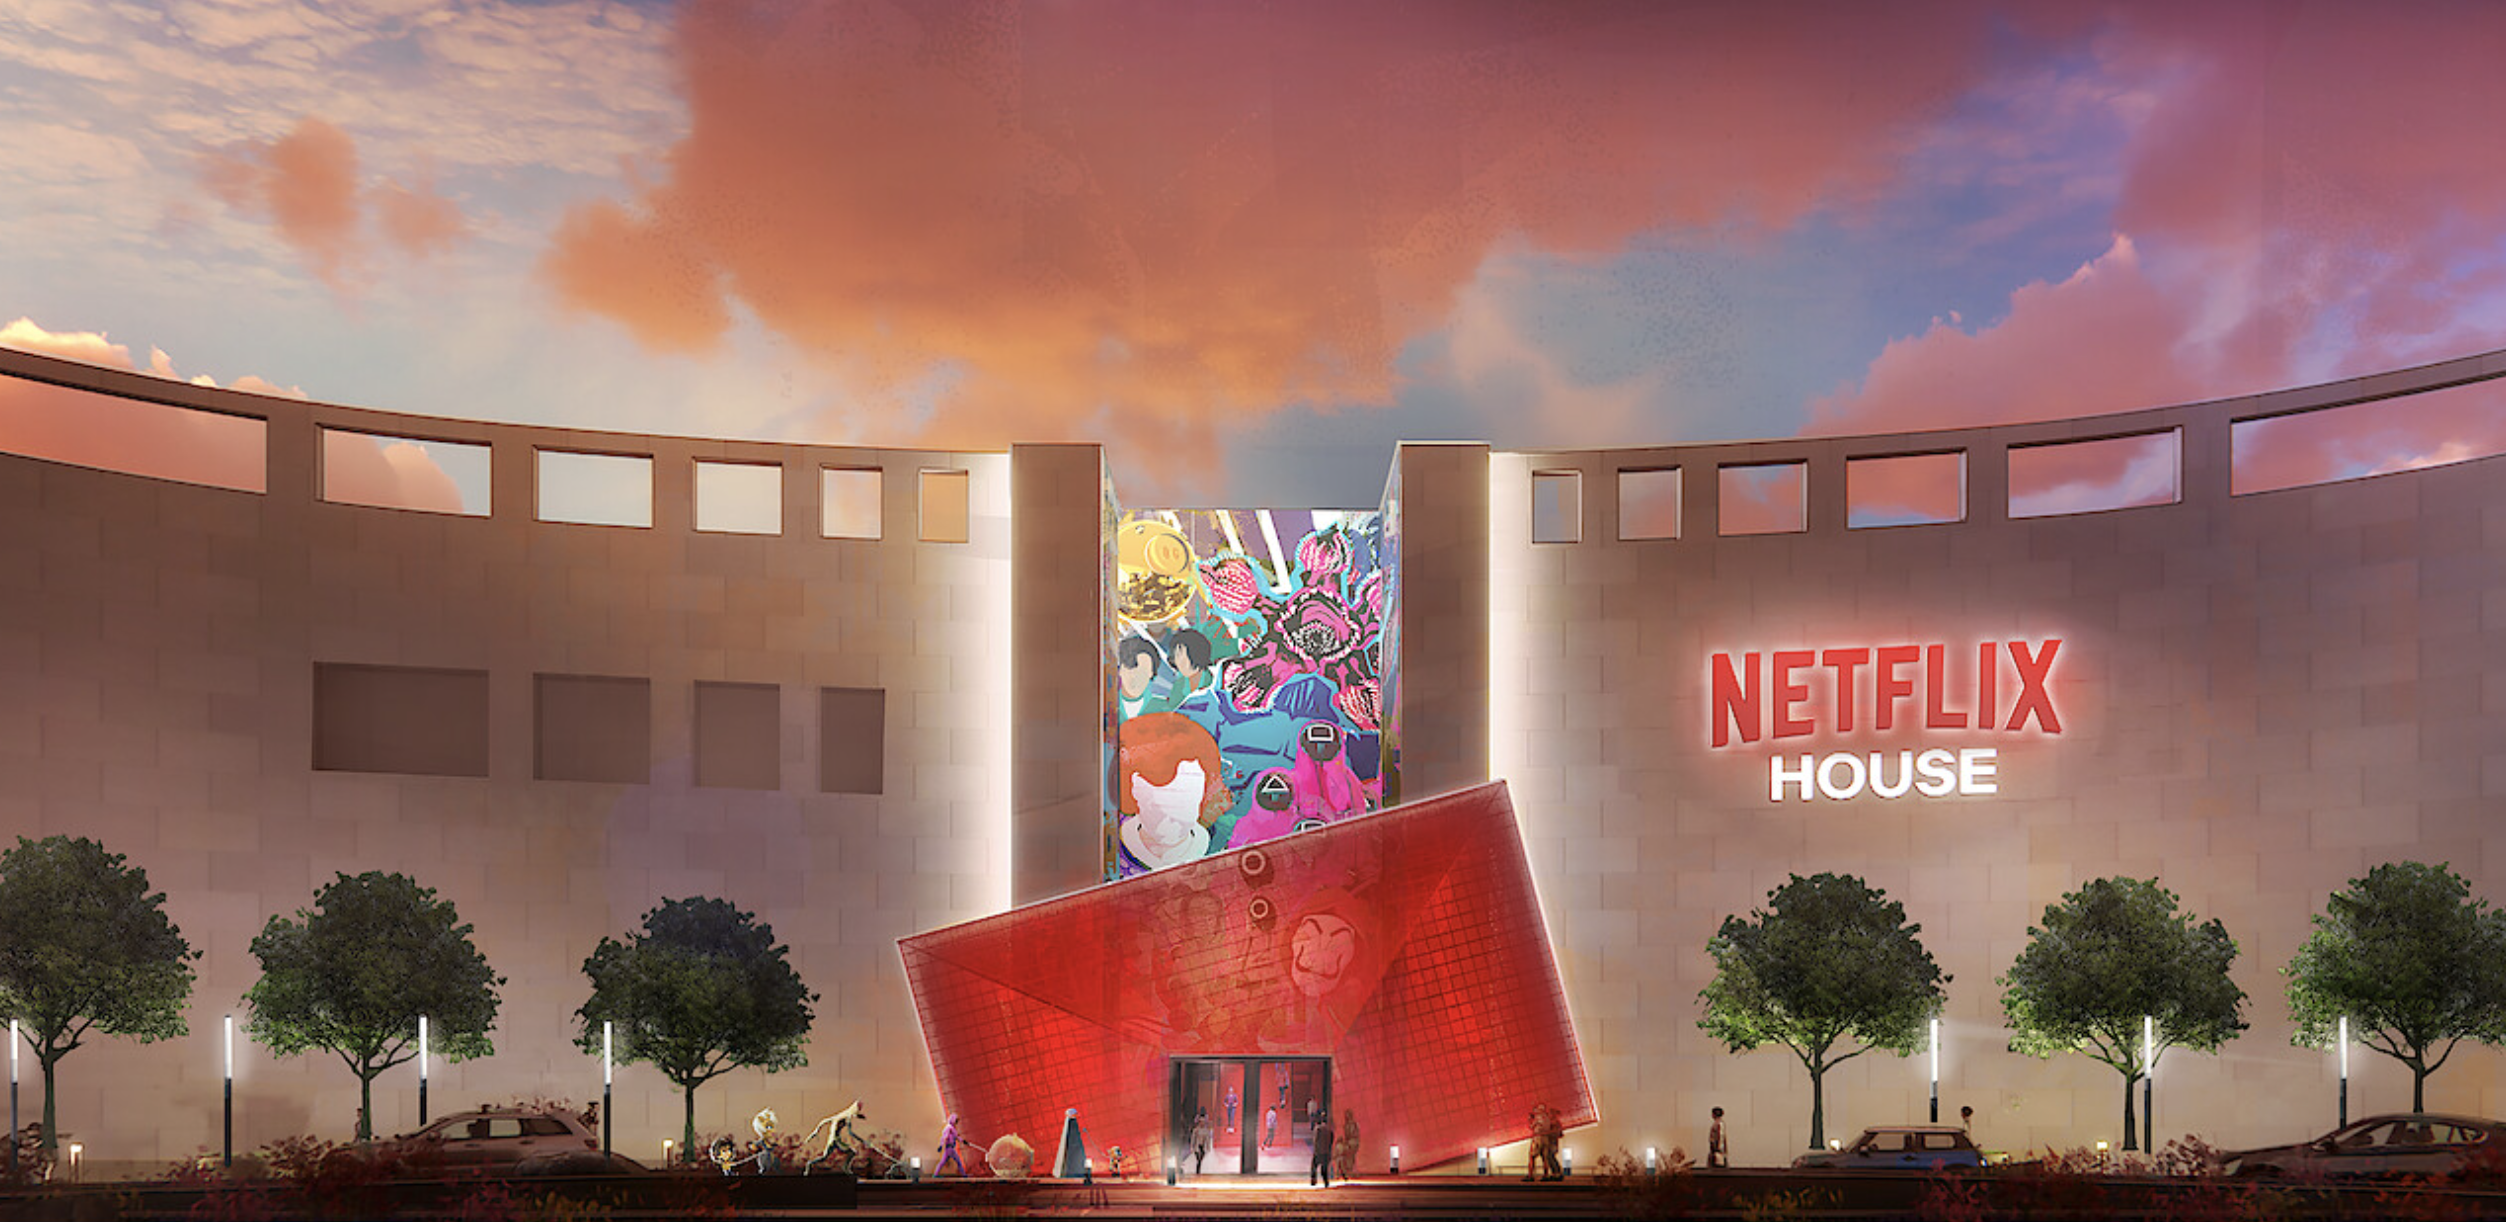 Netflix is opening a giant dining and entertainment complex two hours outside of NYC